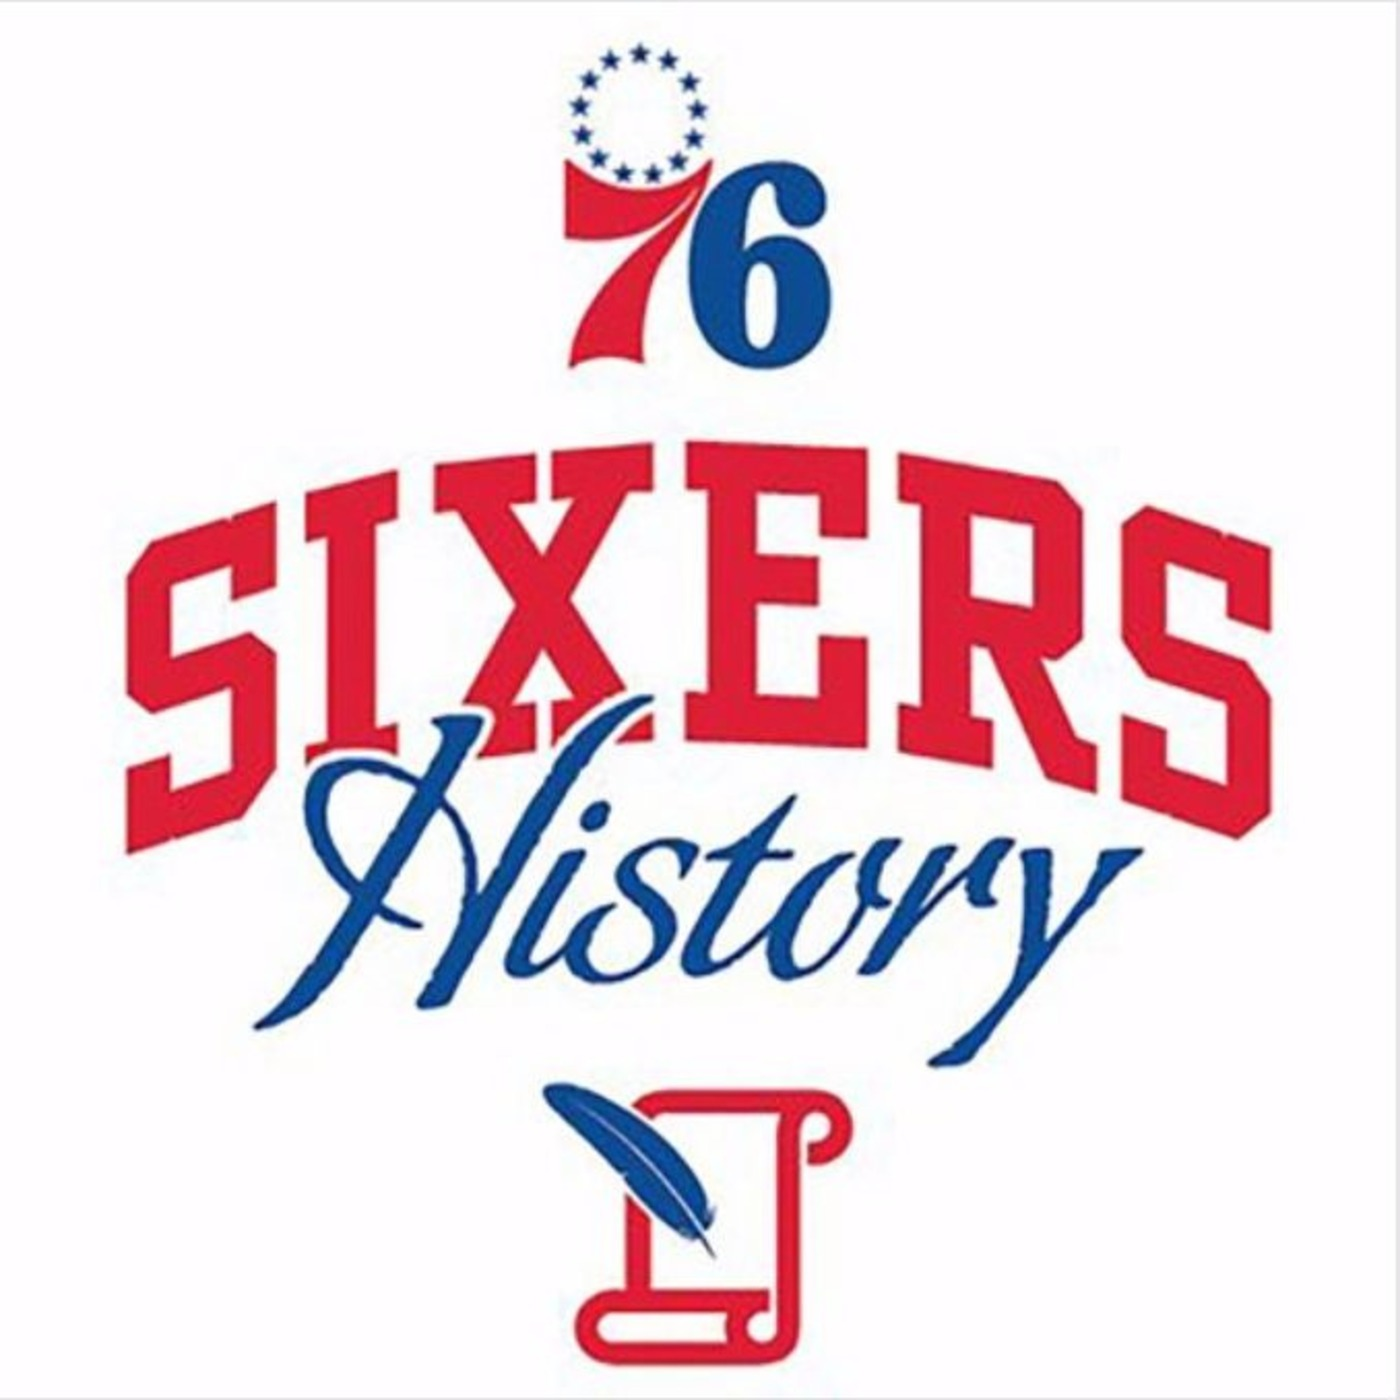 The Sixers History Podcast: Episode 2 - Remembering Philly hoops legend Zack Clayton's legacy